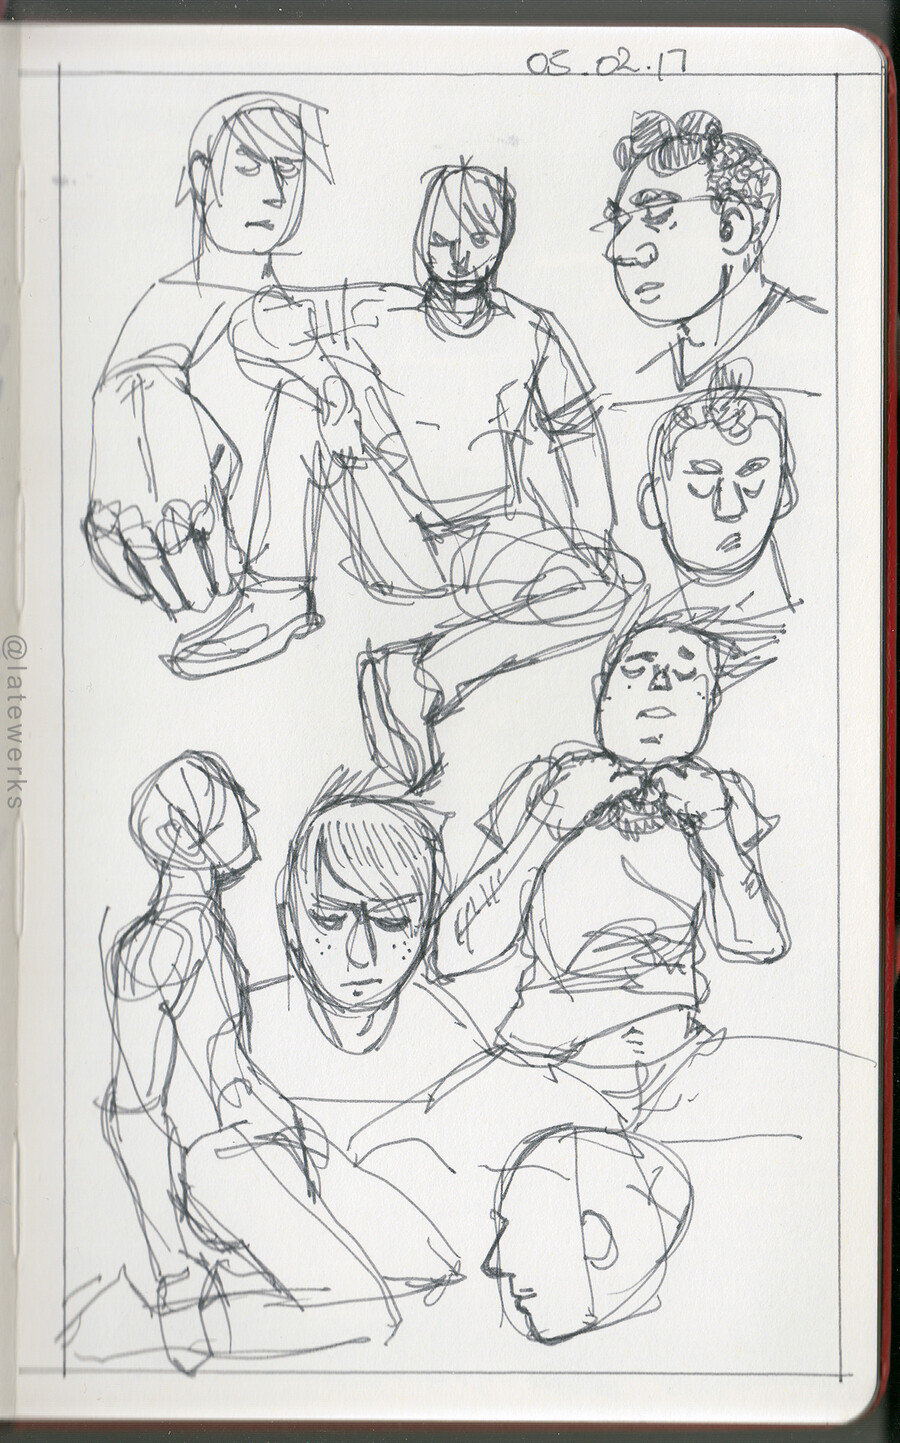 Rough character sketches